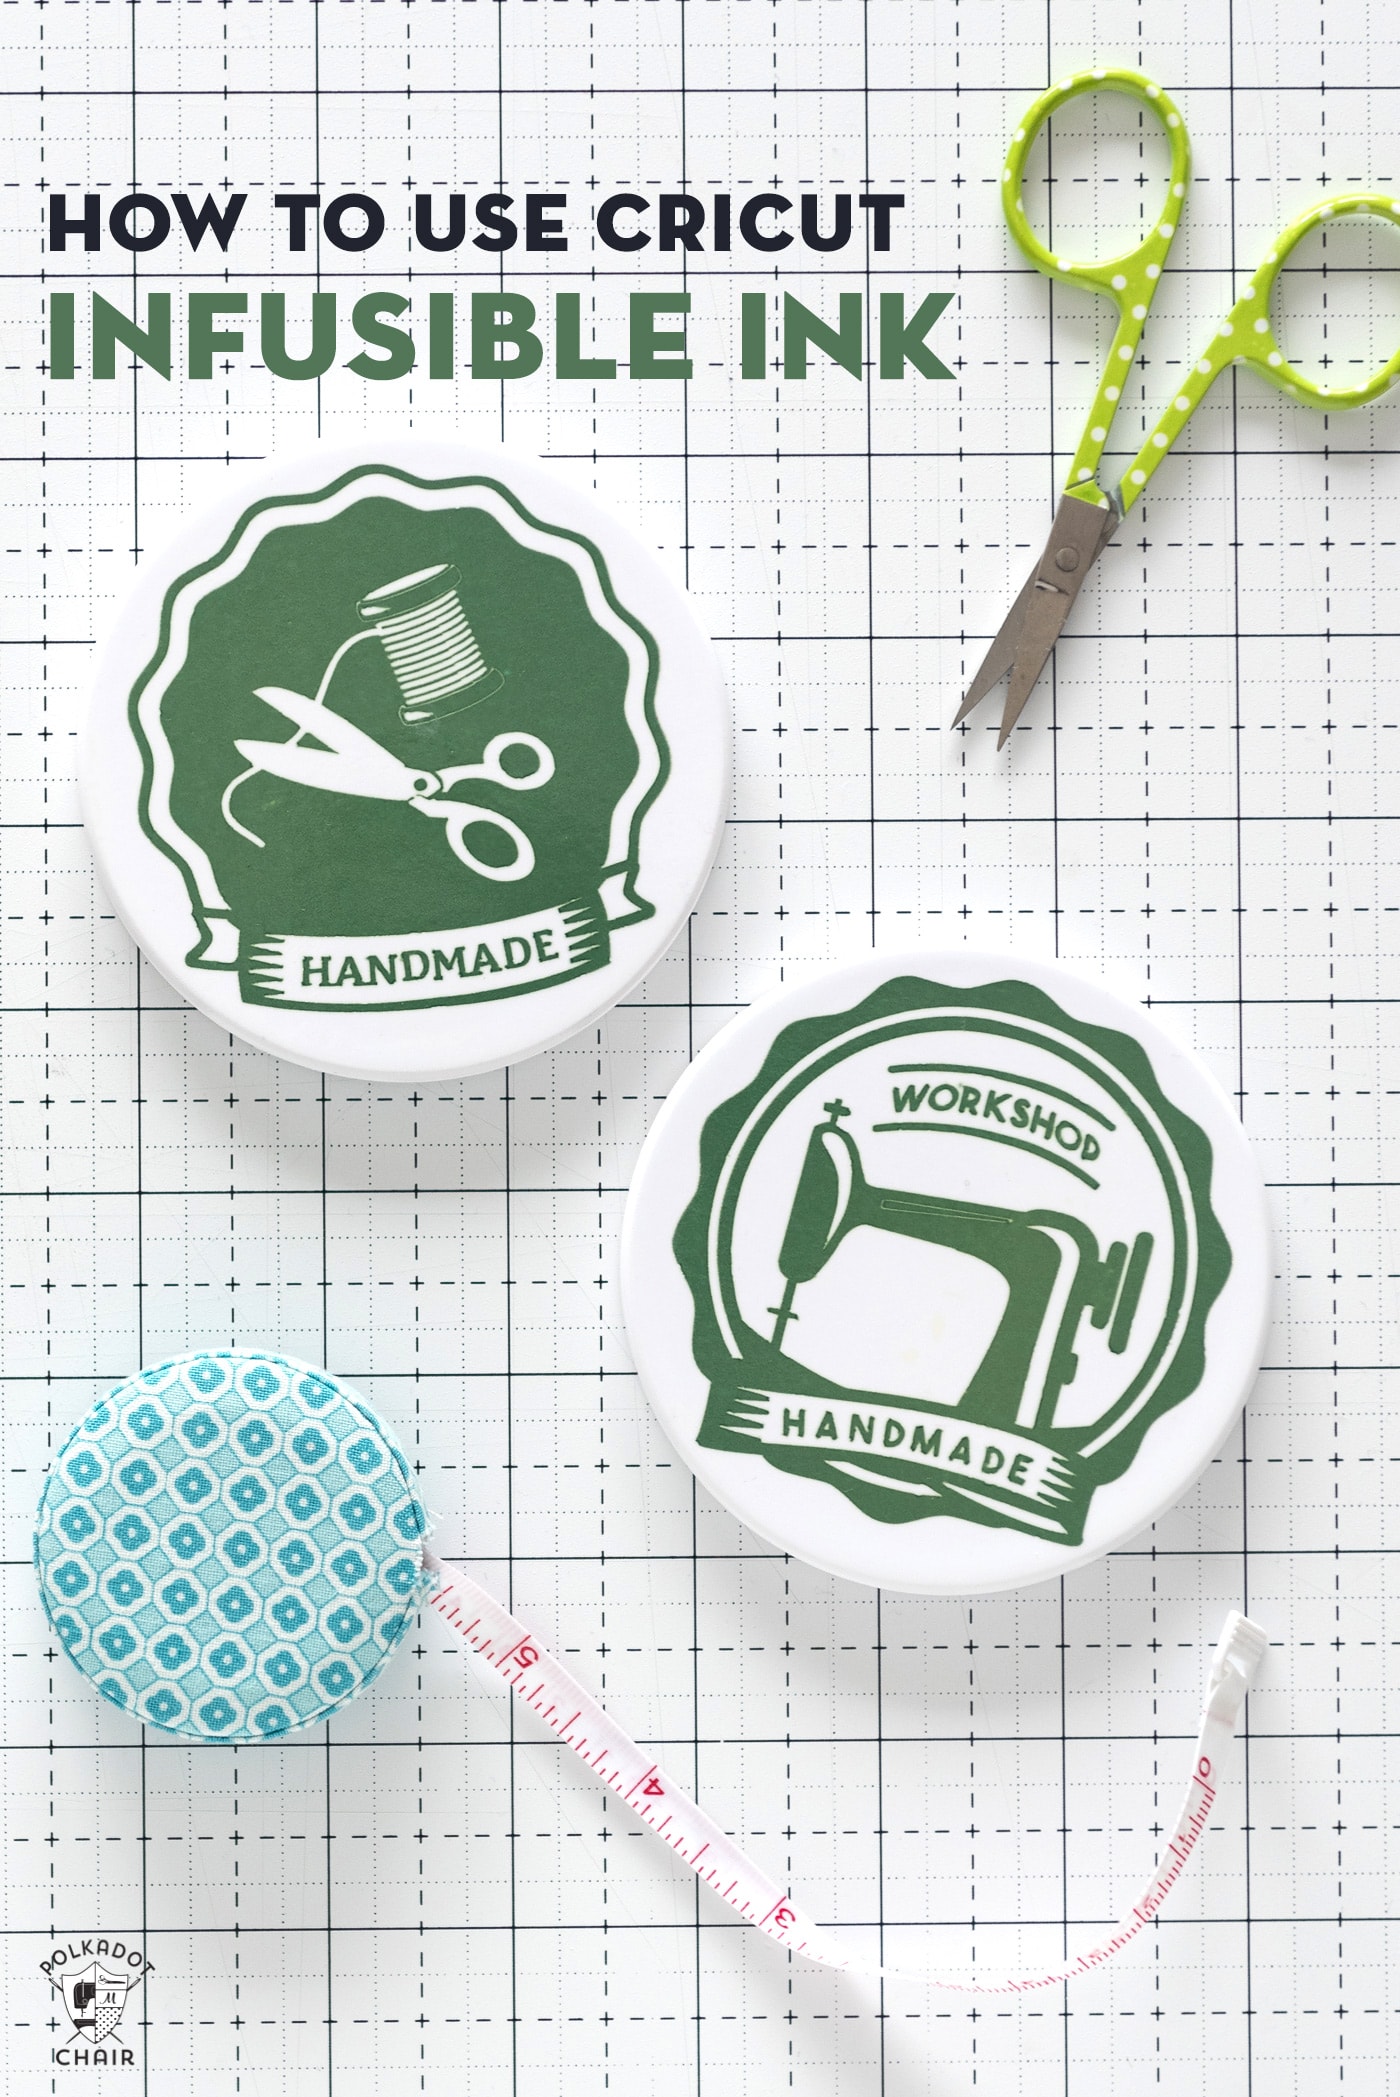 https://www.polkadotchair.com/wp-content/uploads/2019/07/how-use-cricut-infusible-ink.jpg